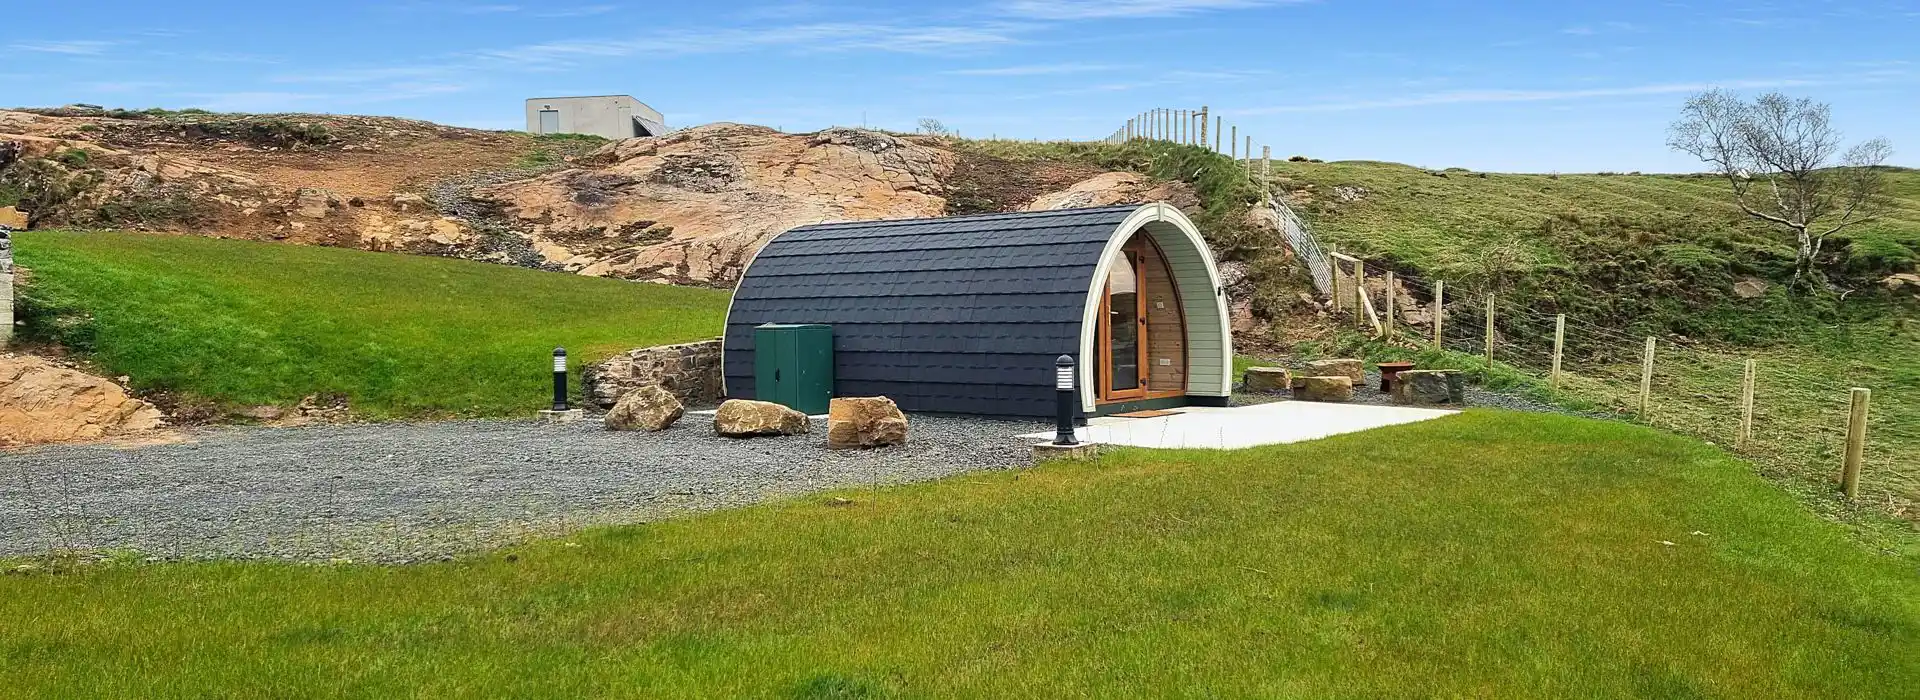 Ballycastle camping and glamping pods